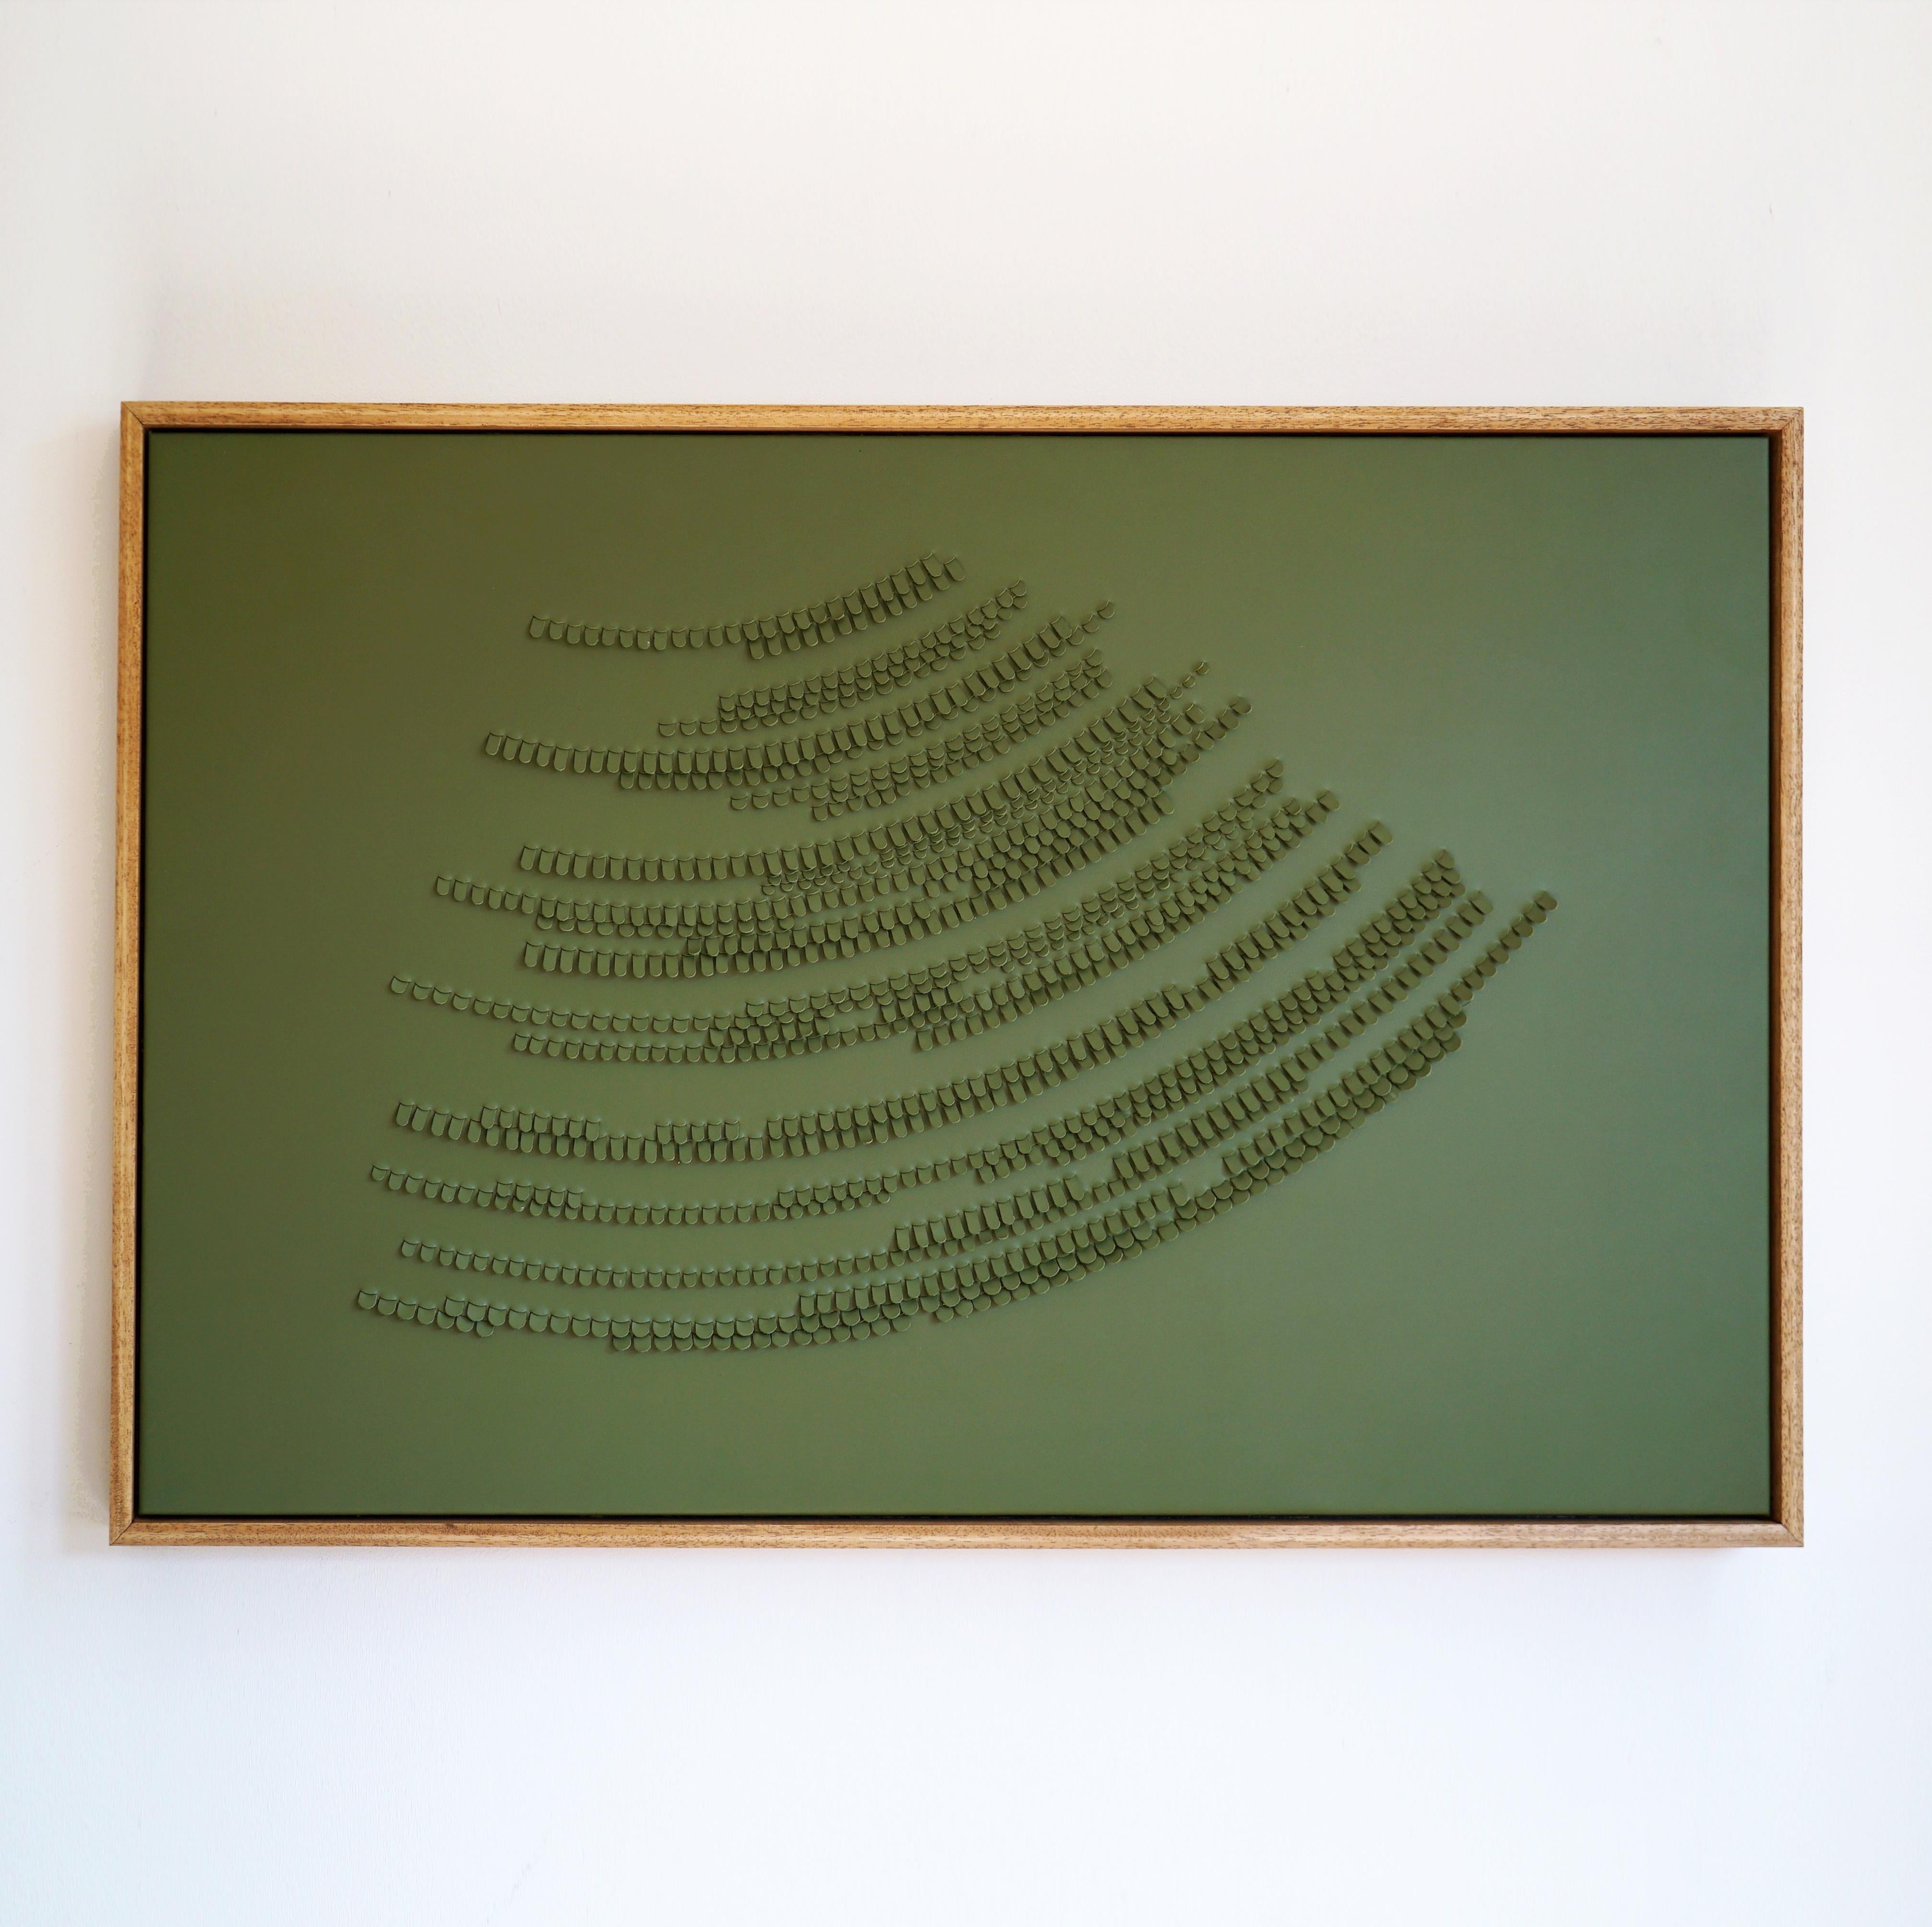 Feather

A piece of 3D sculptural wall art designed and made from two layers of olive leather, woven together by Louise Heighes.
Measurements are 45 x 29 inches or 114 x 74 cm.
 
This piece is inspired by the subtle changes in the size and